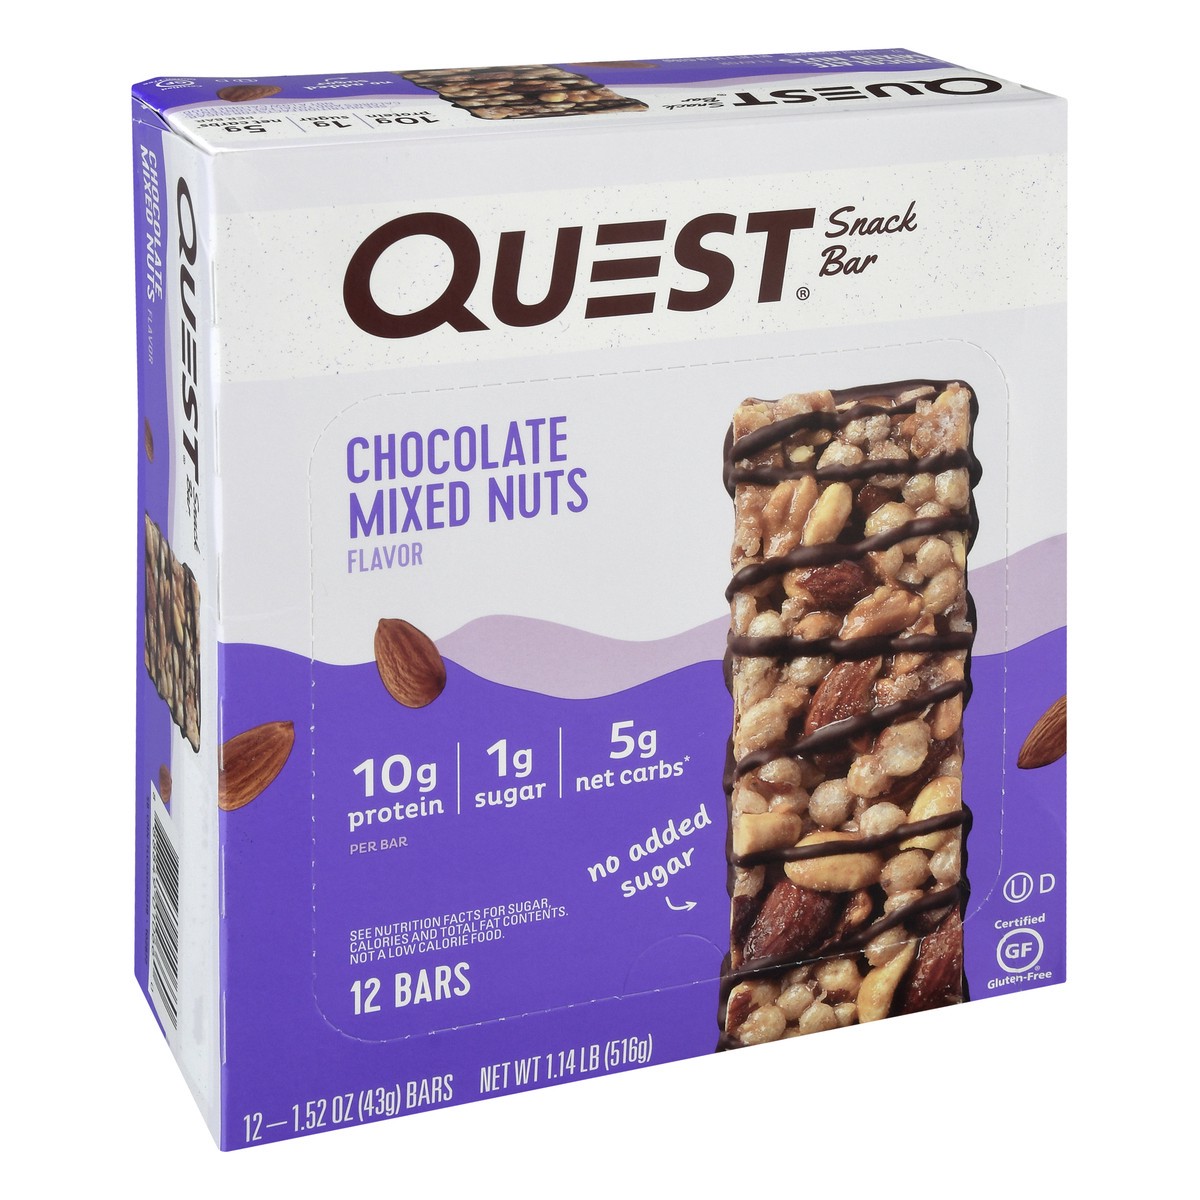 slide 10 of 13, Quest Chocolate Mixed Nuts Flavor Snack Bar 12 ea, 1 ct